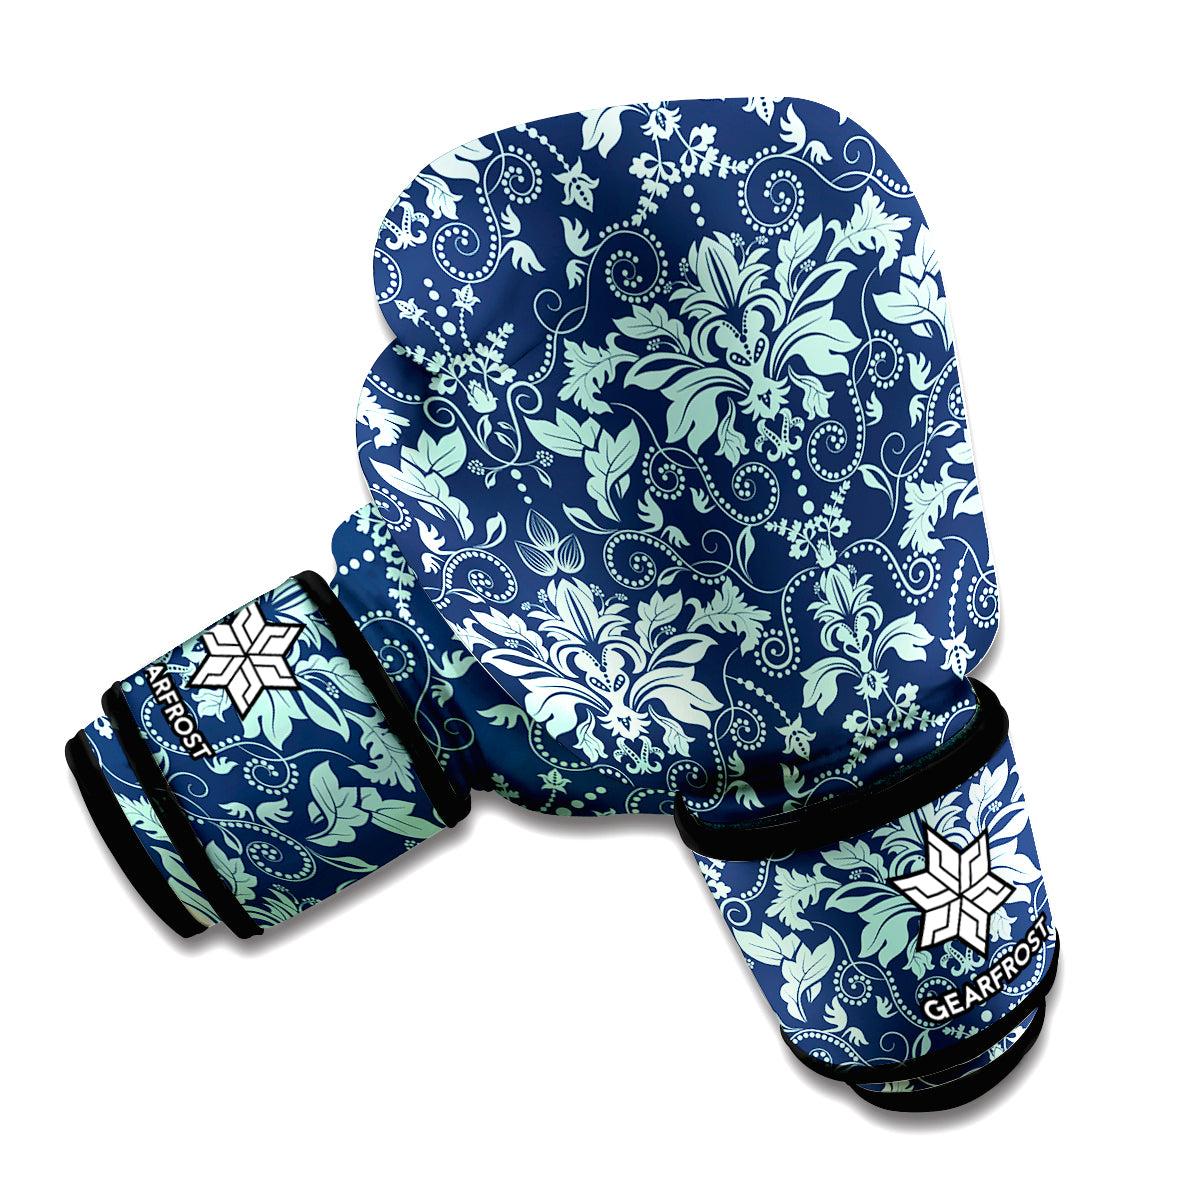 Blue And Teal Damask Pattern Print Boxing Gloves